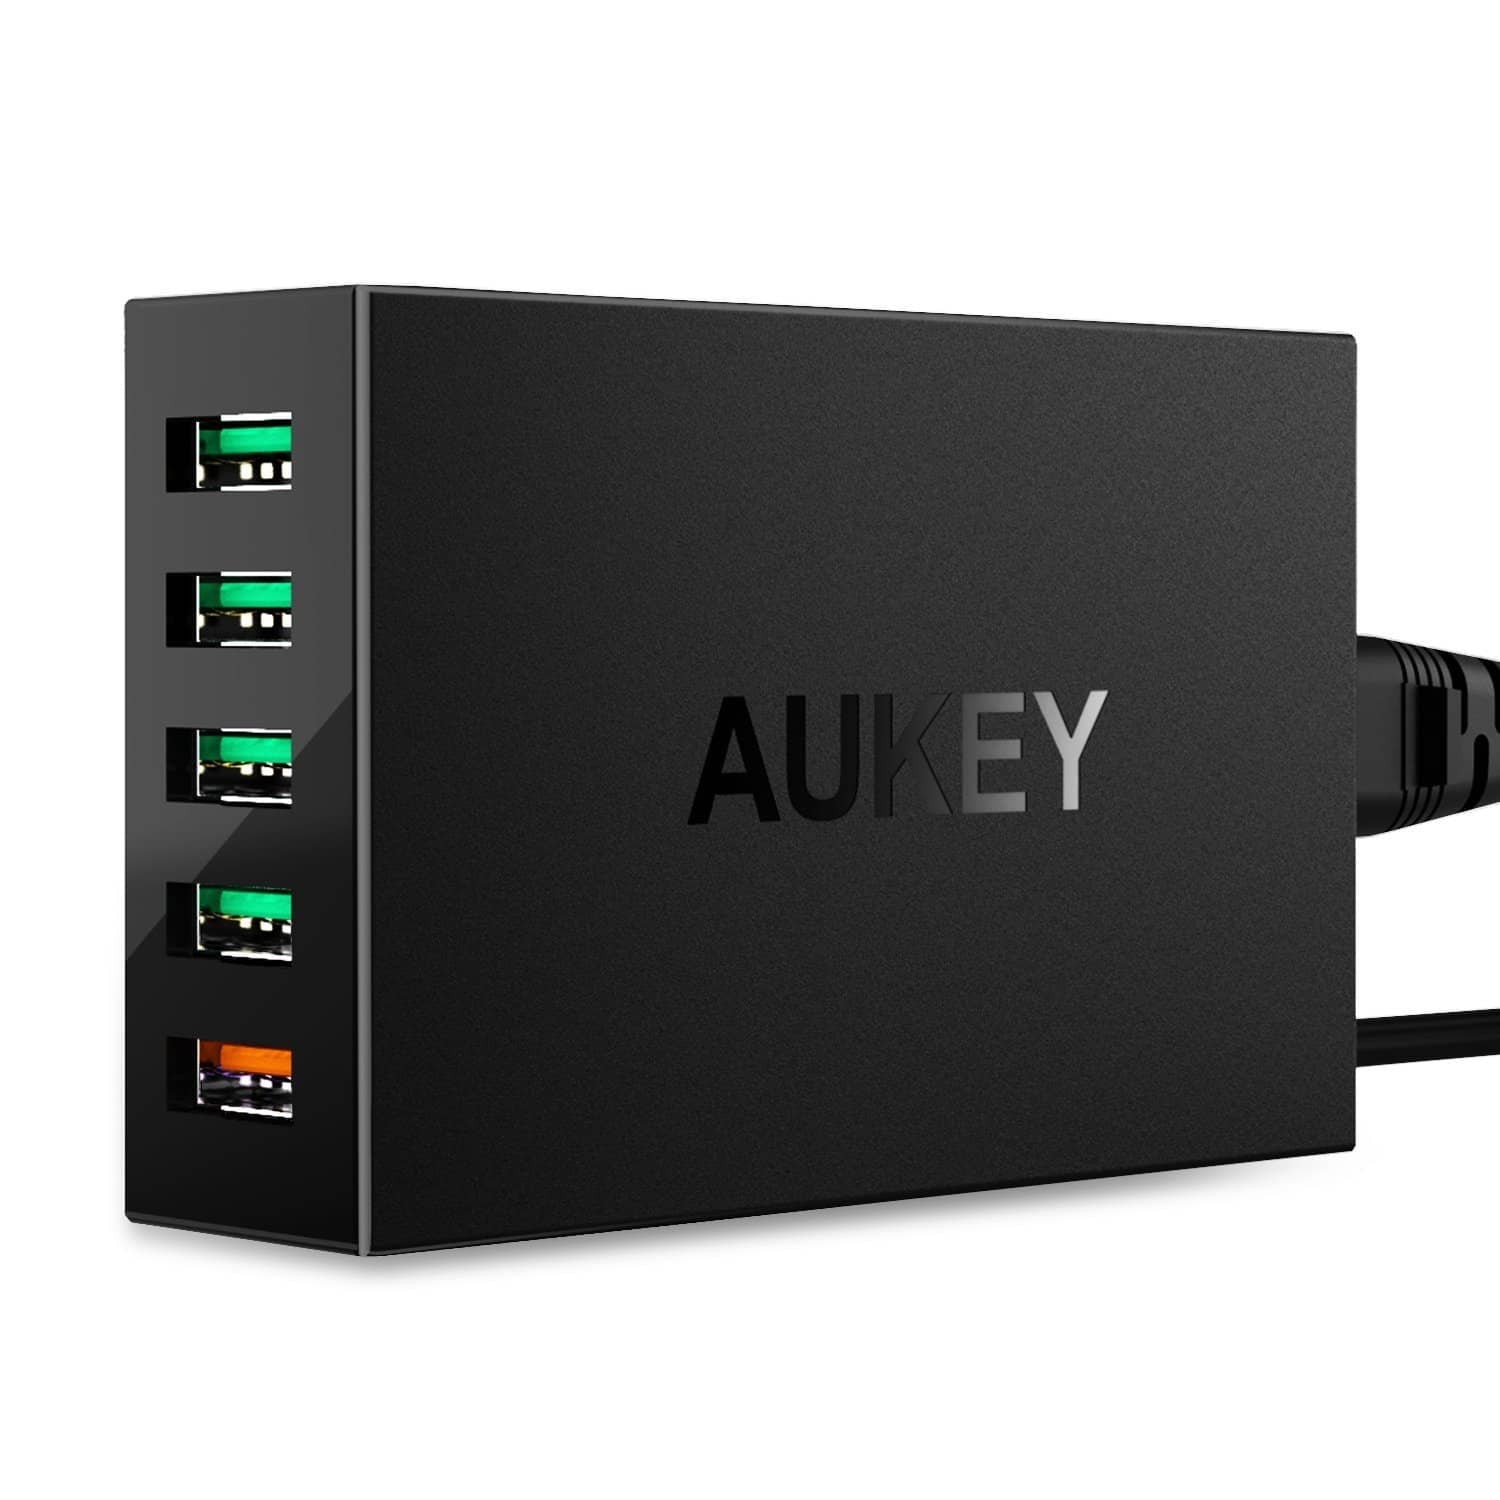 AUKEY PA-T15 54W 5 USB port Qualcomm Quick Charge 3.0 Desktop Charger - Aukey Malaysia Official Store